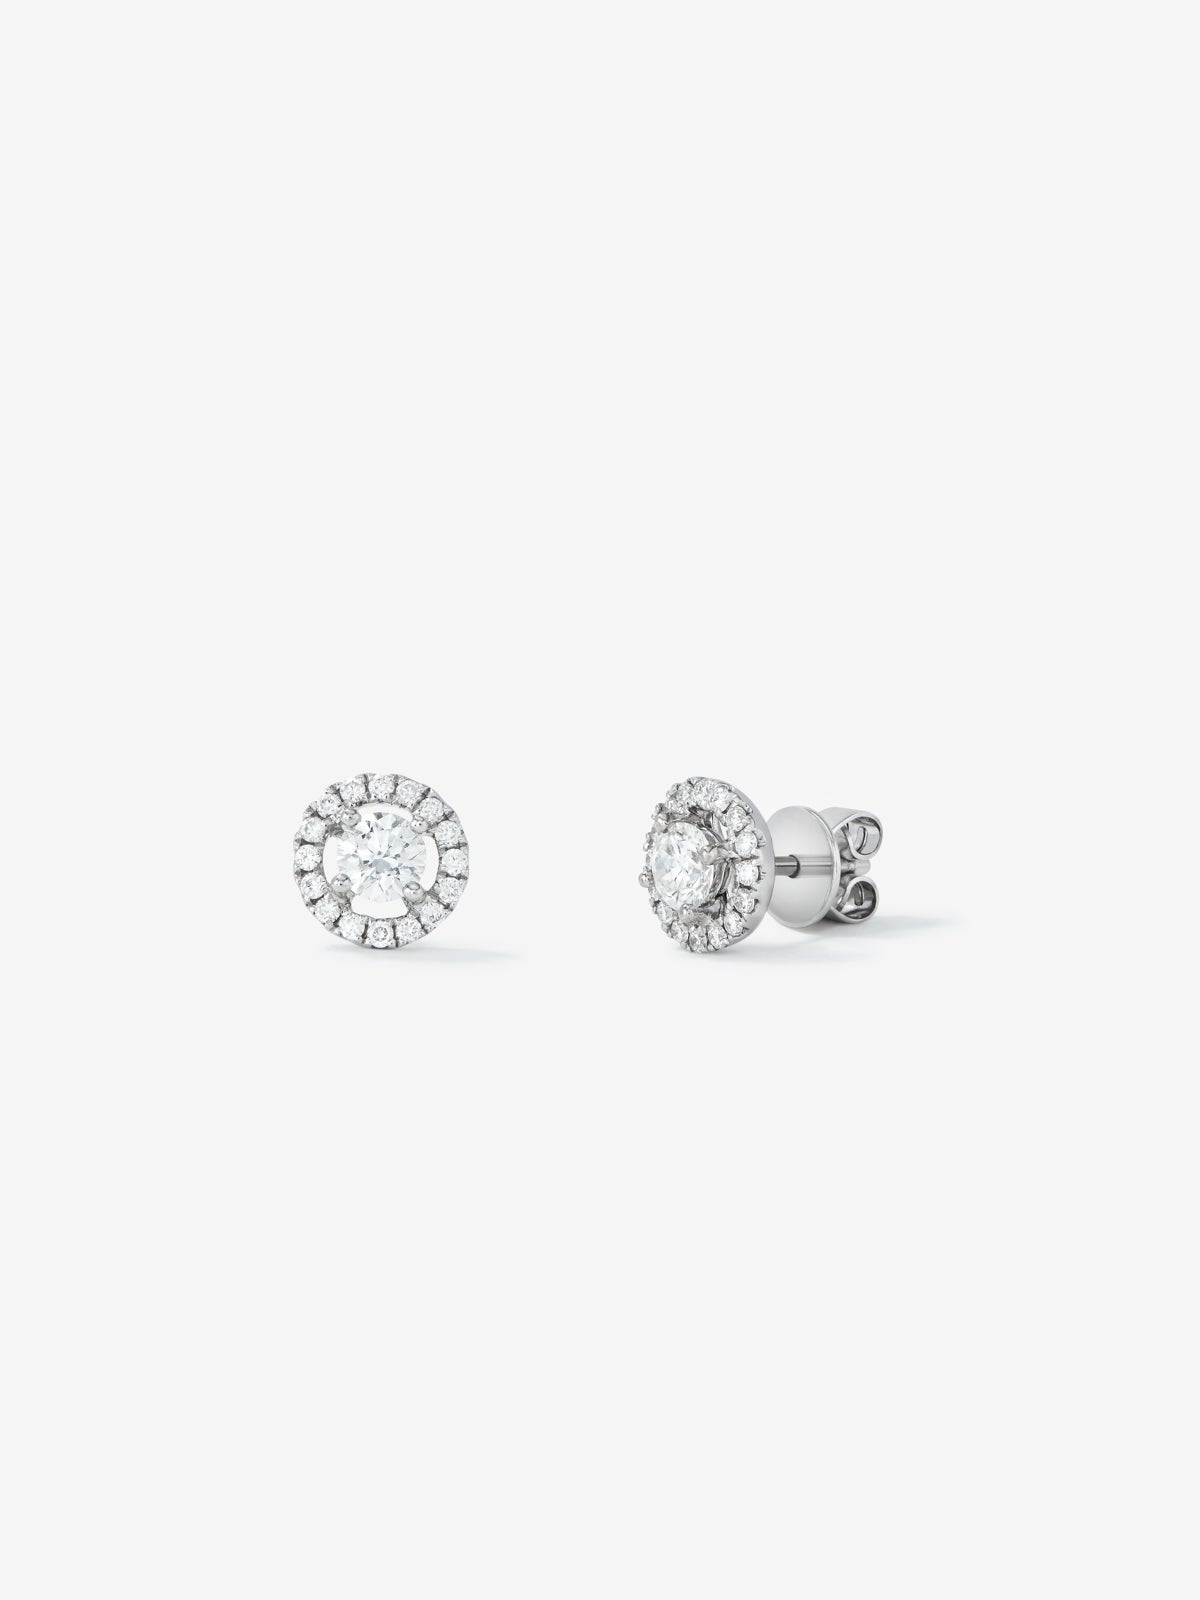 18K white gold earrings with white diamonds of 1.04 cts